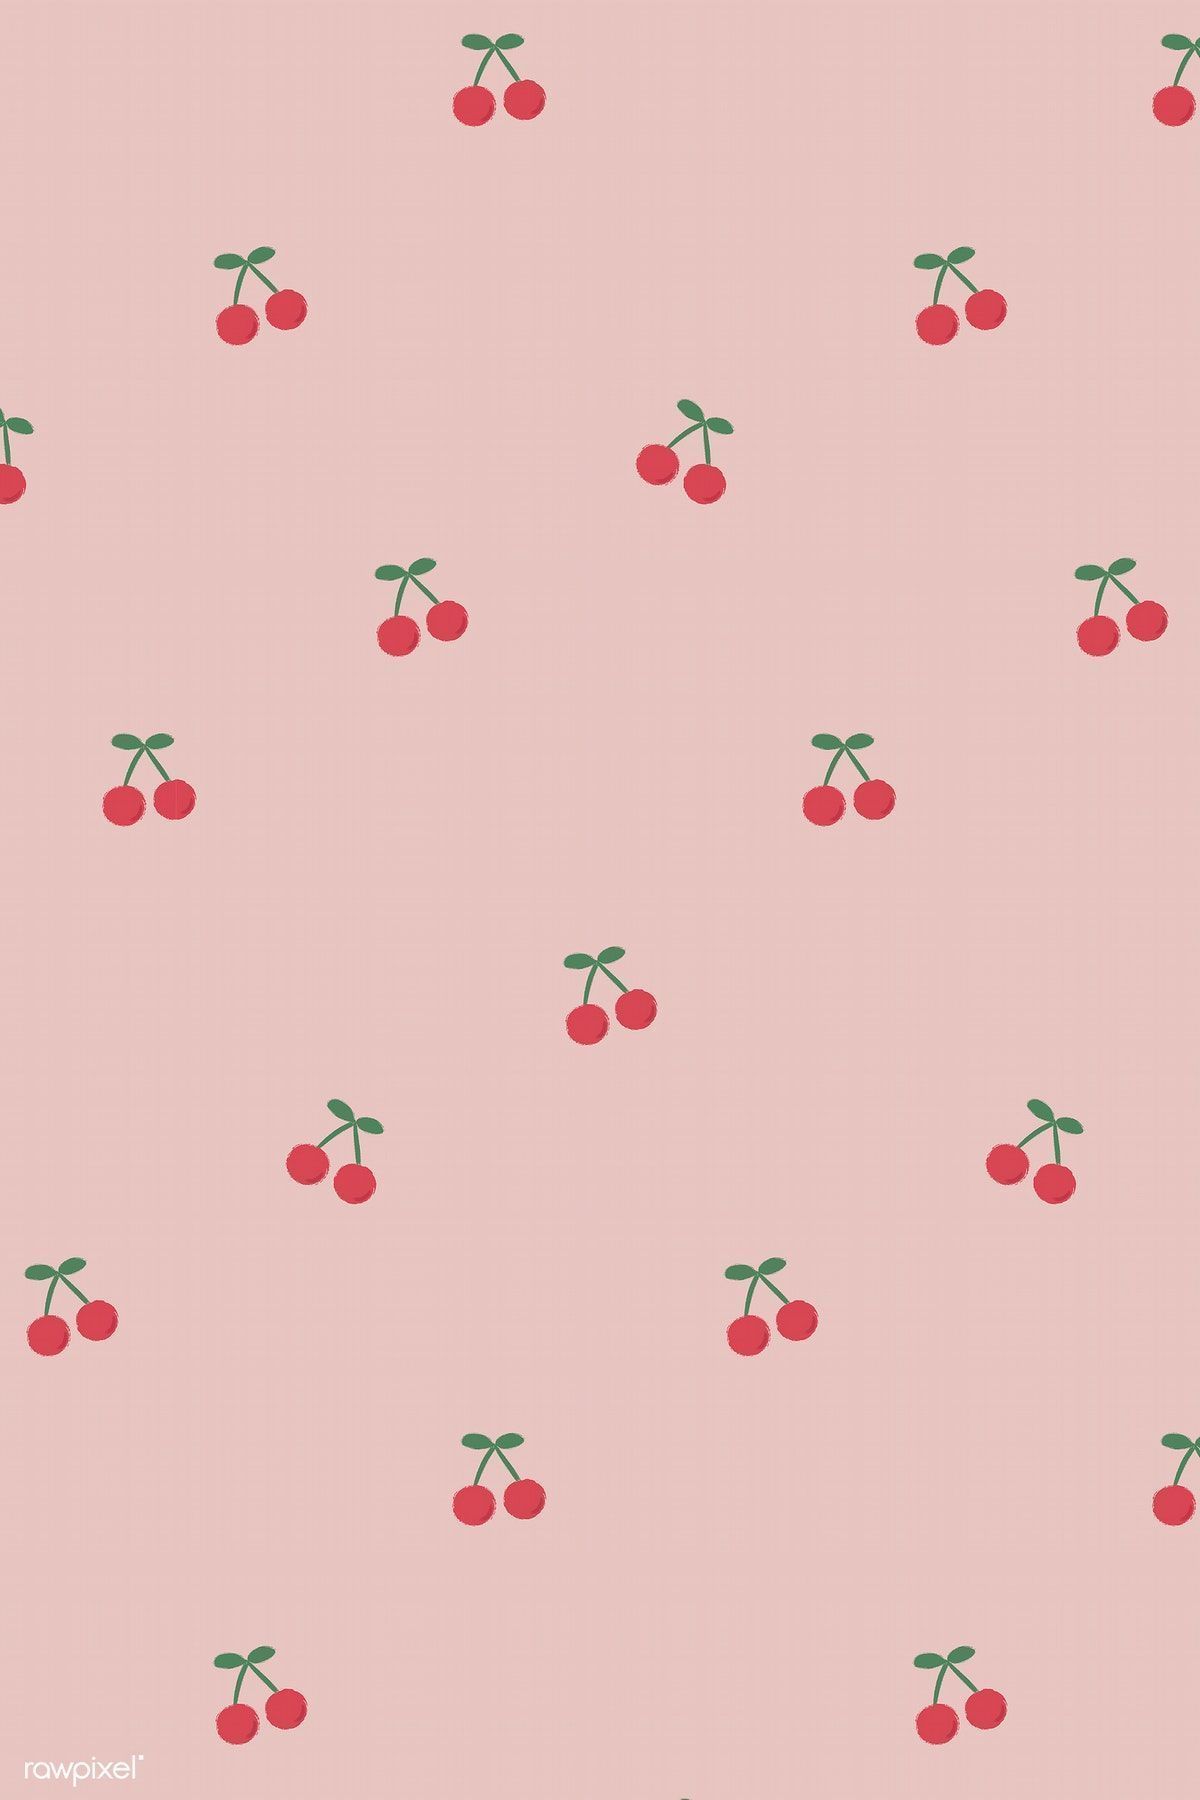 Cute Pink Aesthetic Wallpapers For Ipad - Draw-link